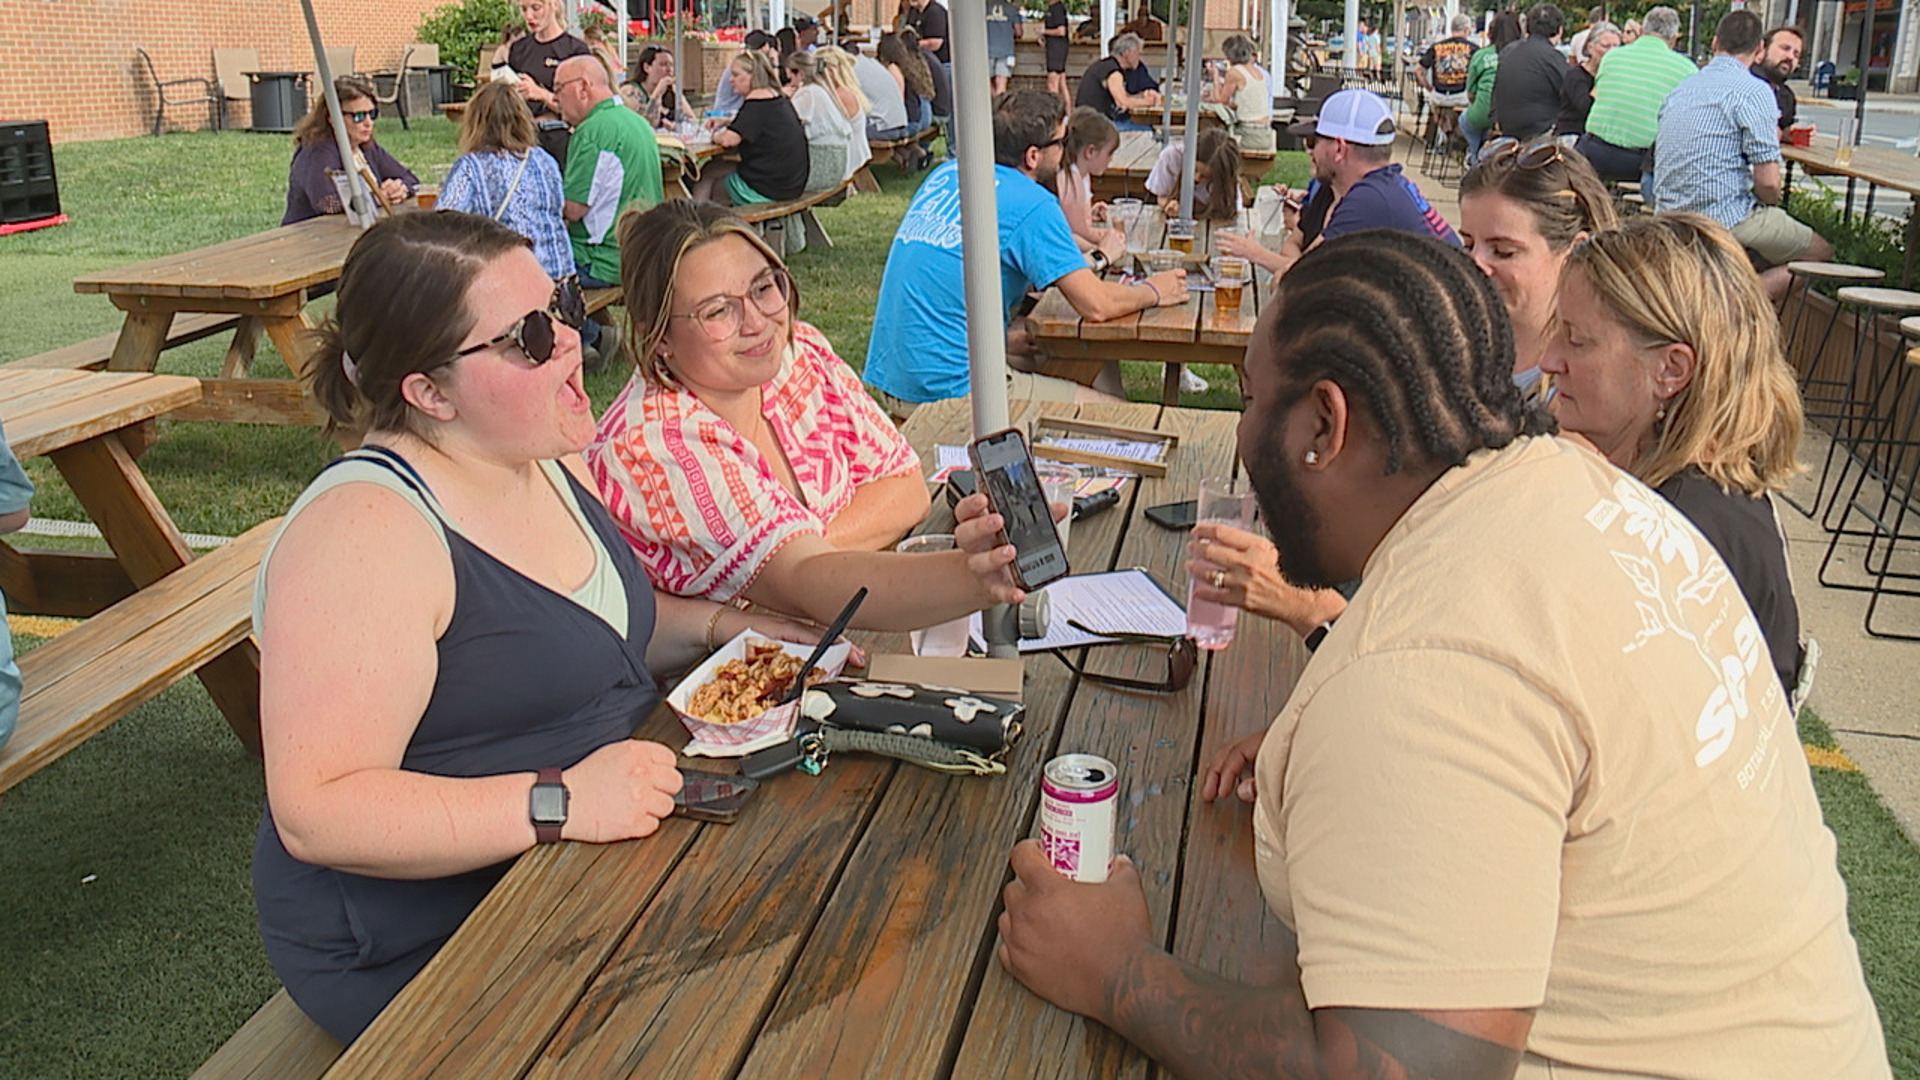 York businesses took advantage of Friday’s clear weather and offered outdoor dining for the first time in quite a while.